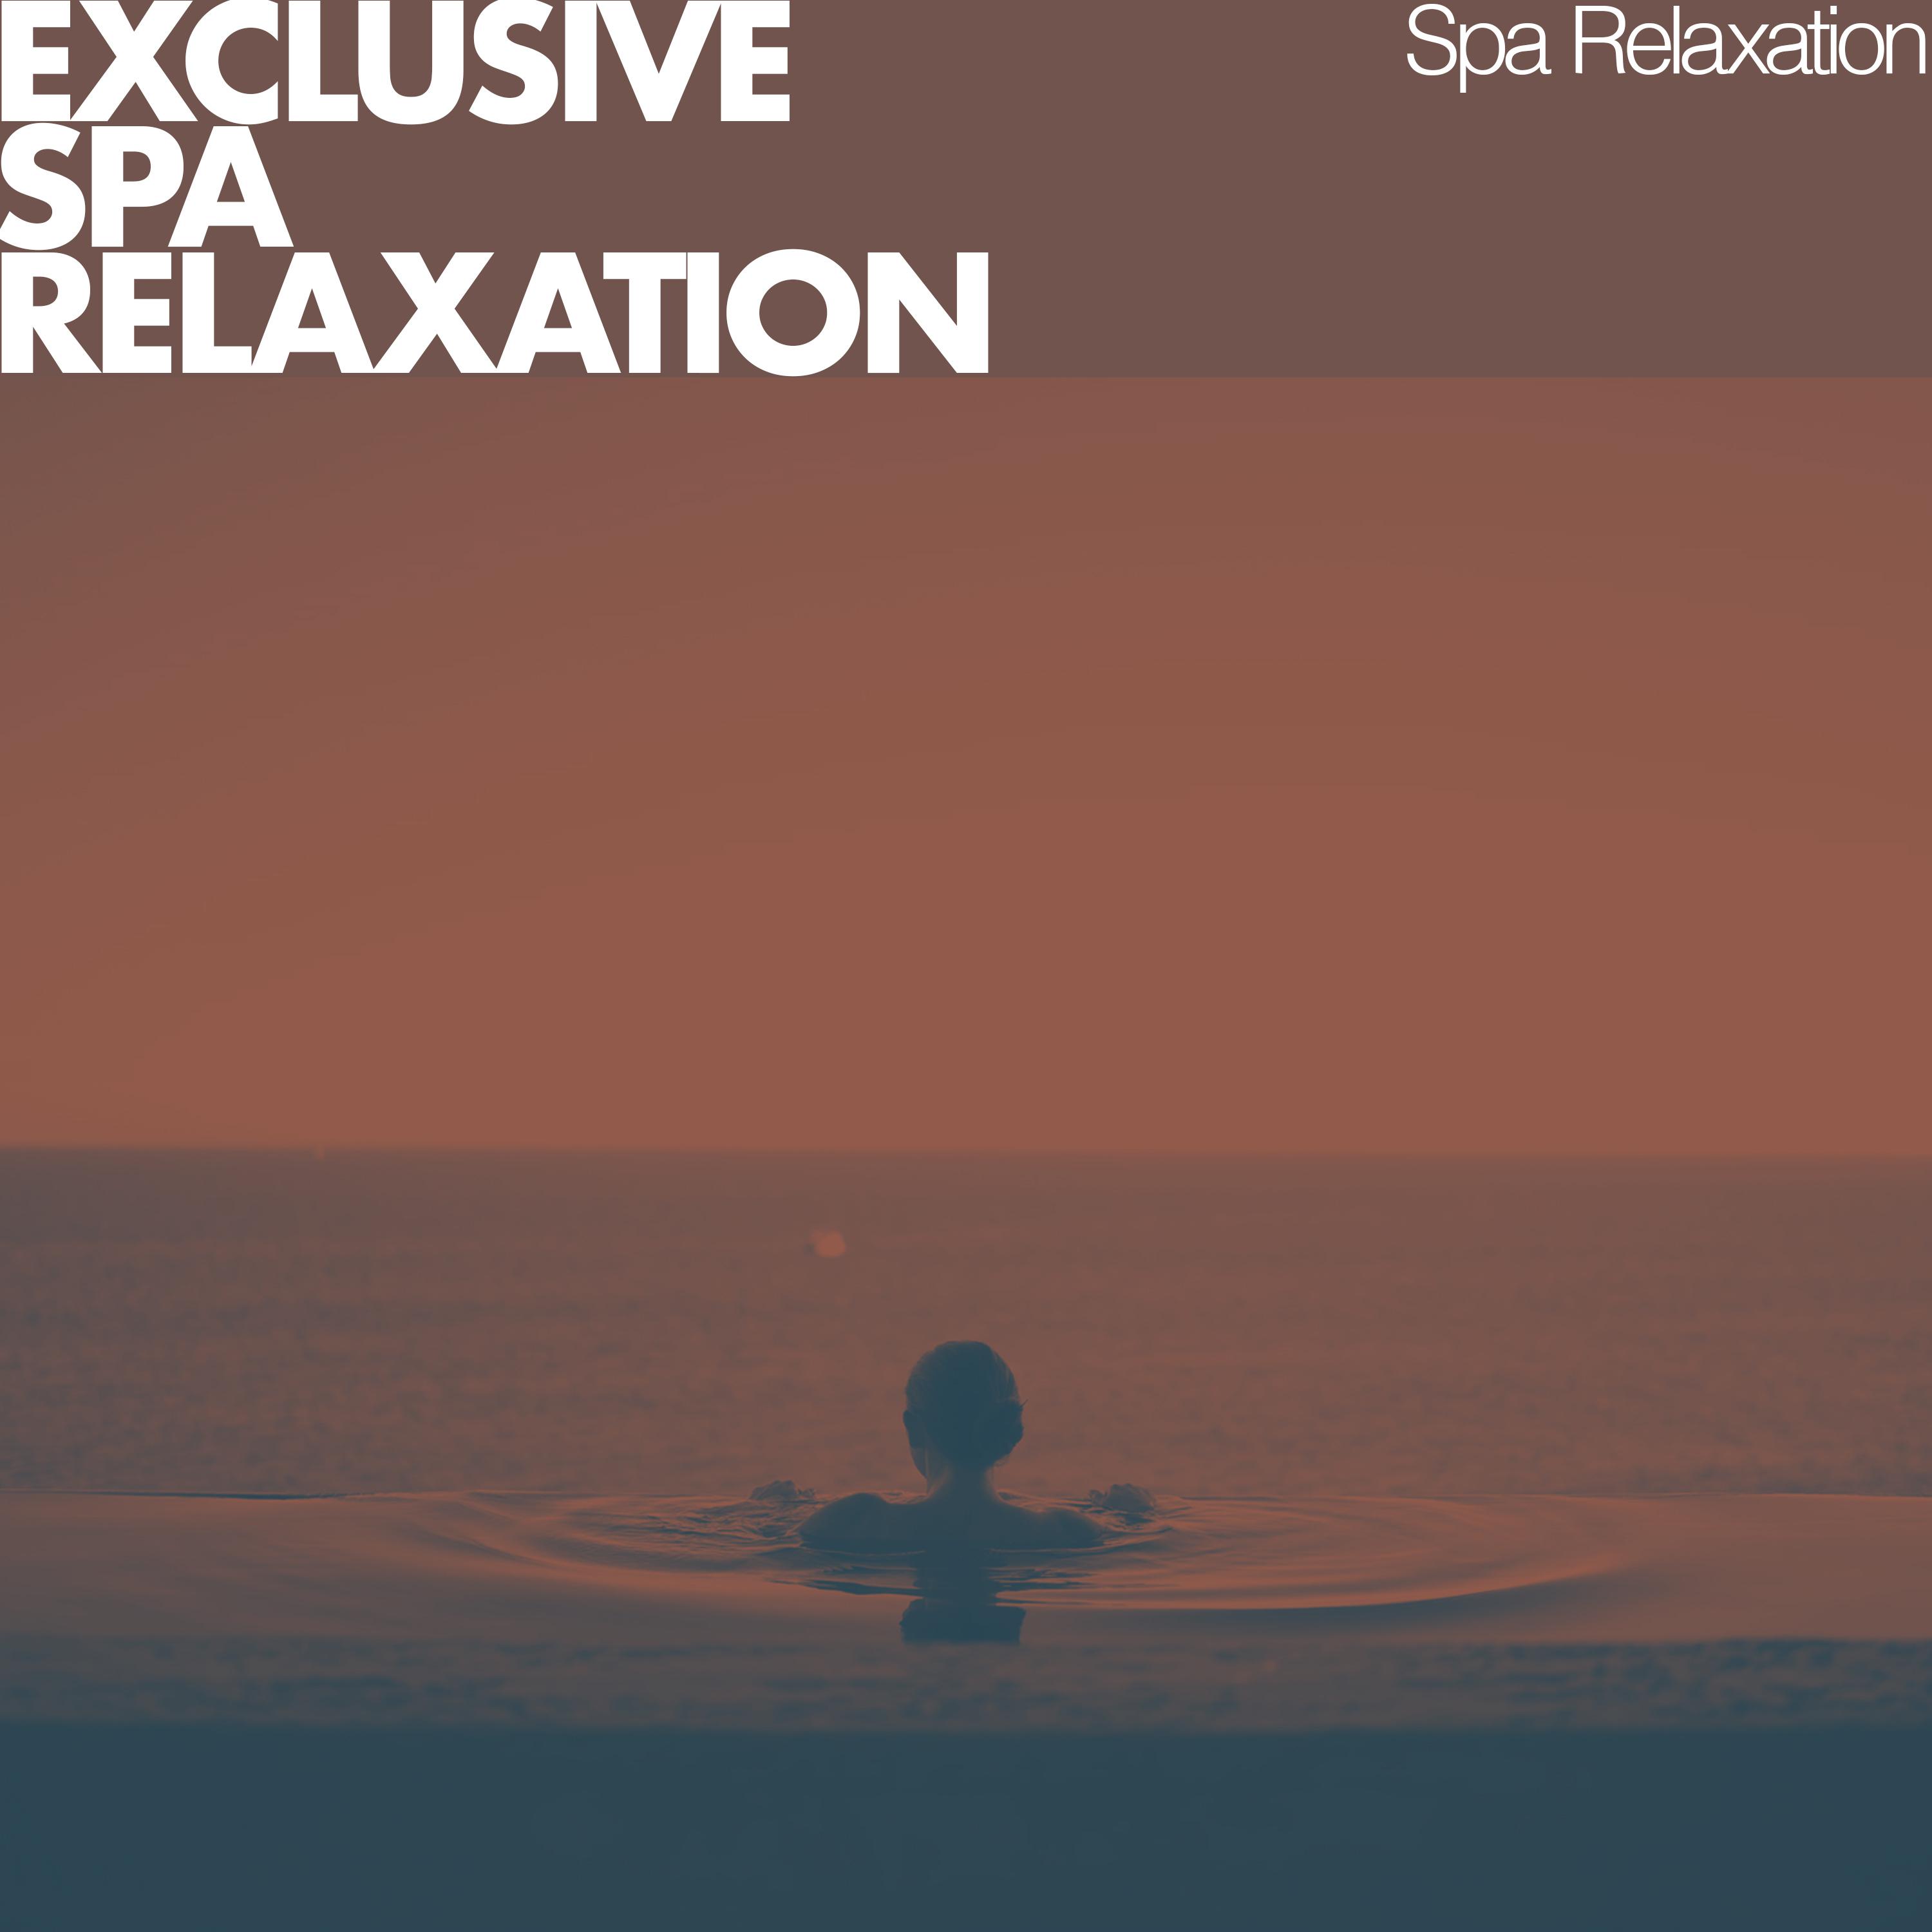 Exclusive Spa Relaxation